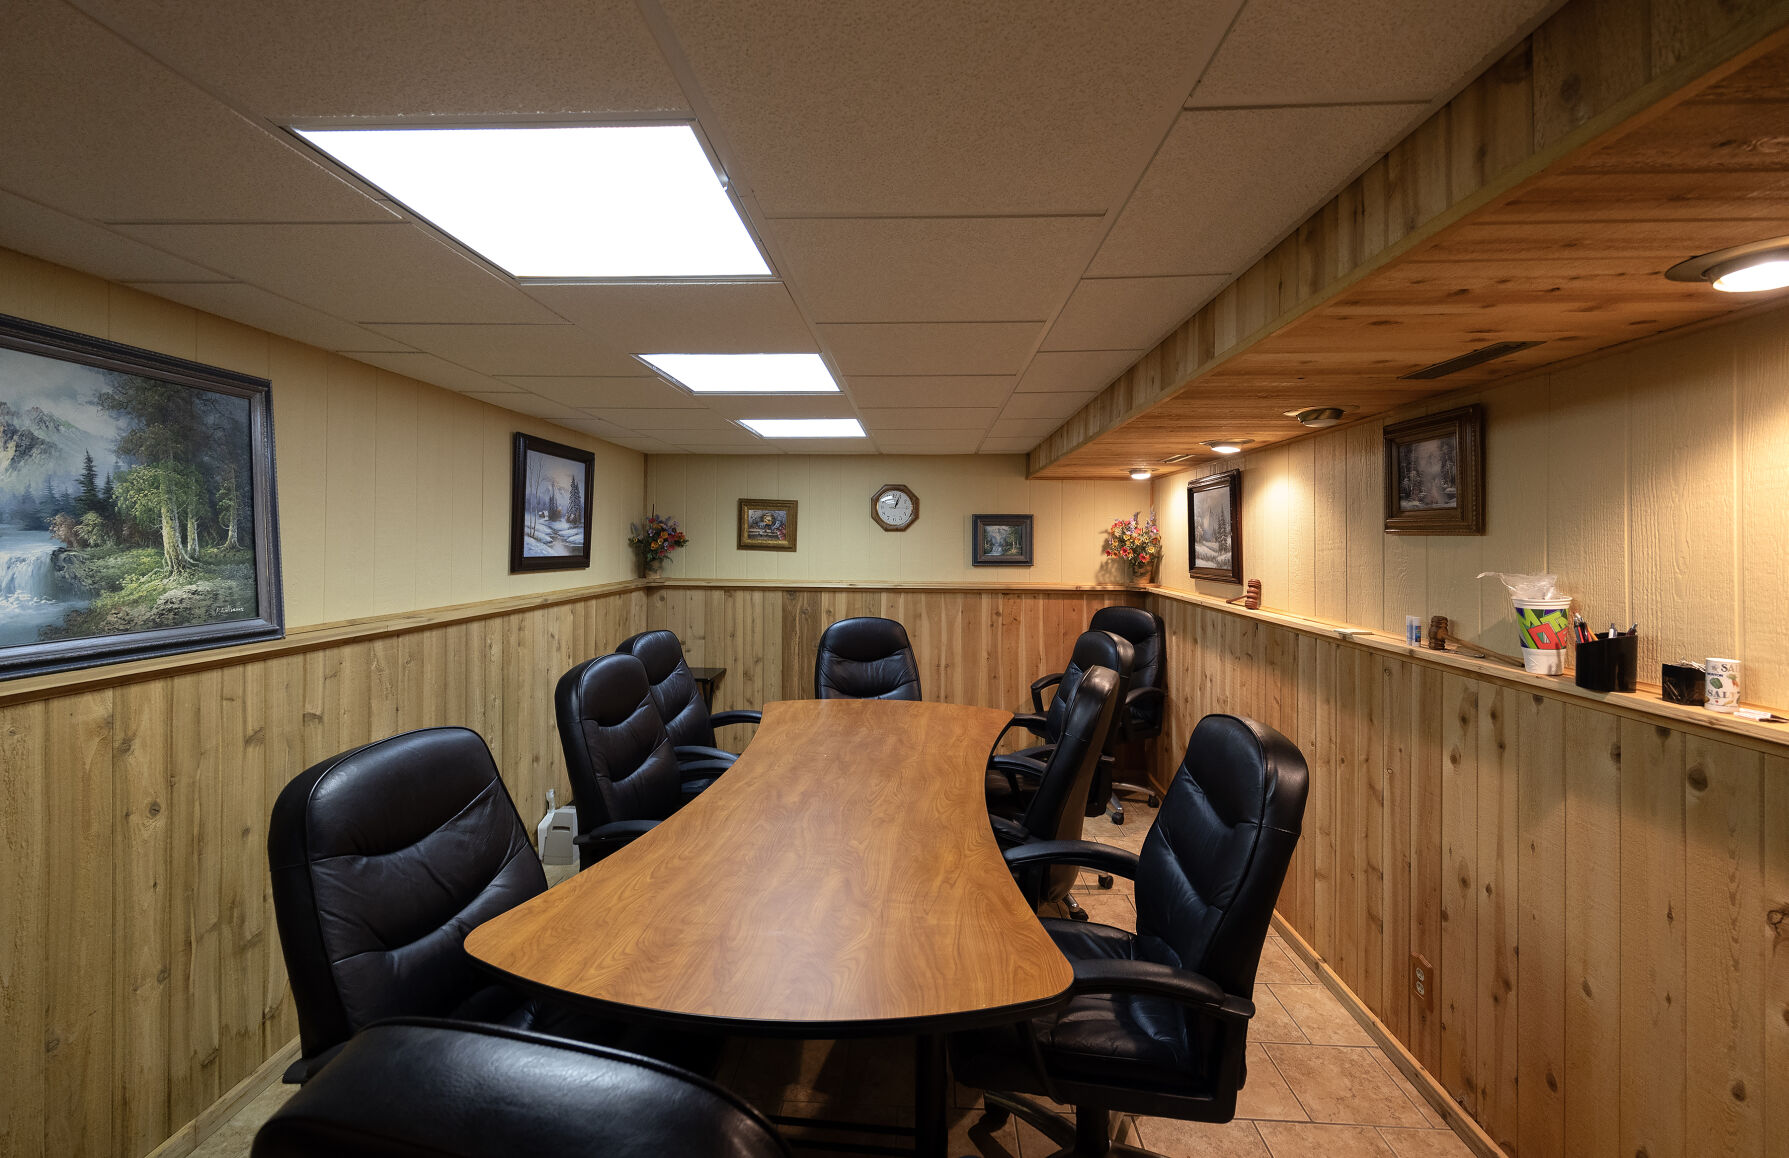 The conference room at Dubuque Postal Employees Credit Union.    PHOTO CREDIT: Stephen Gassman